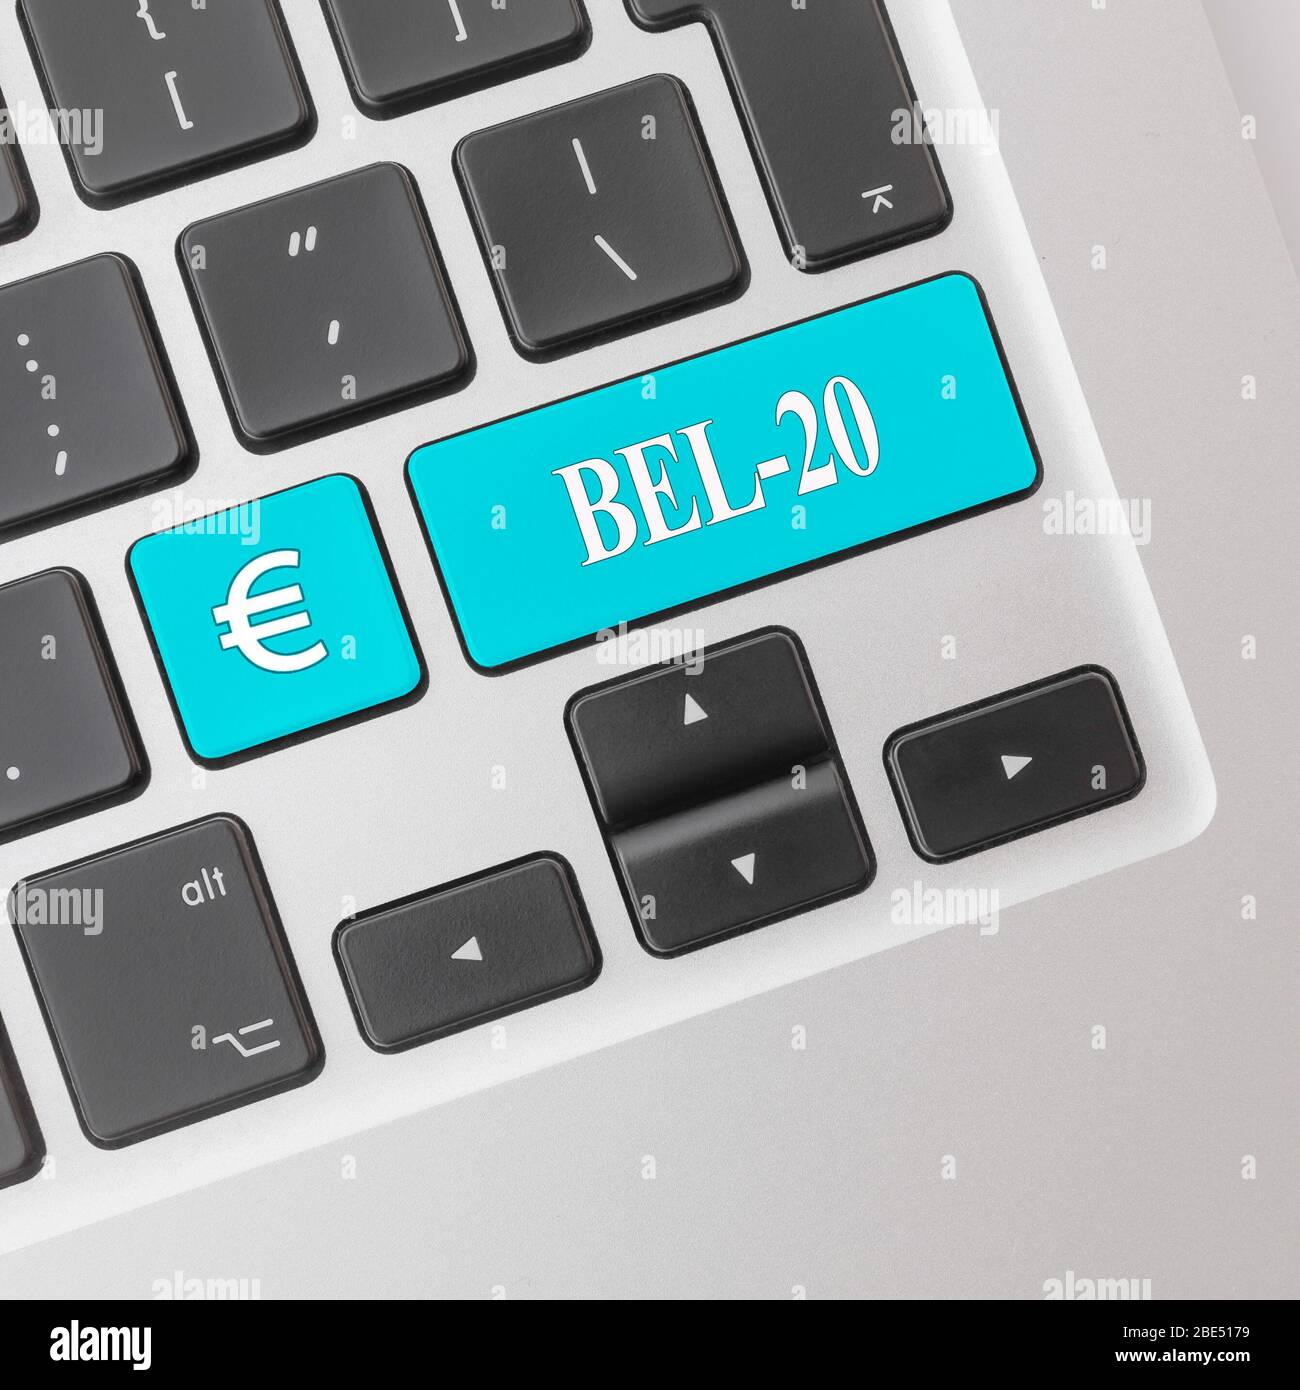 BEL-20 on a computer keyboard. The BEL 20 is the benchmark stock market index of Euronext Brussels. Stock Photo